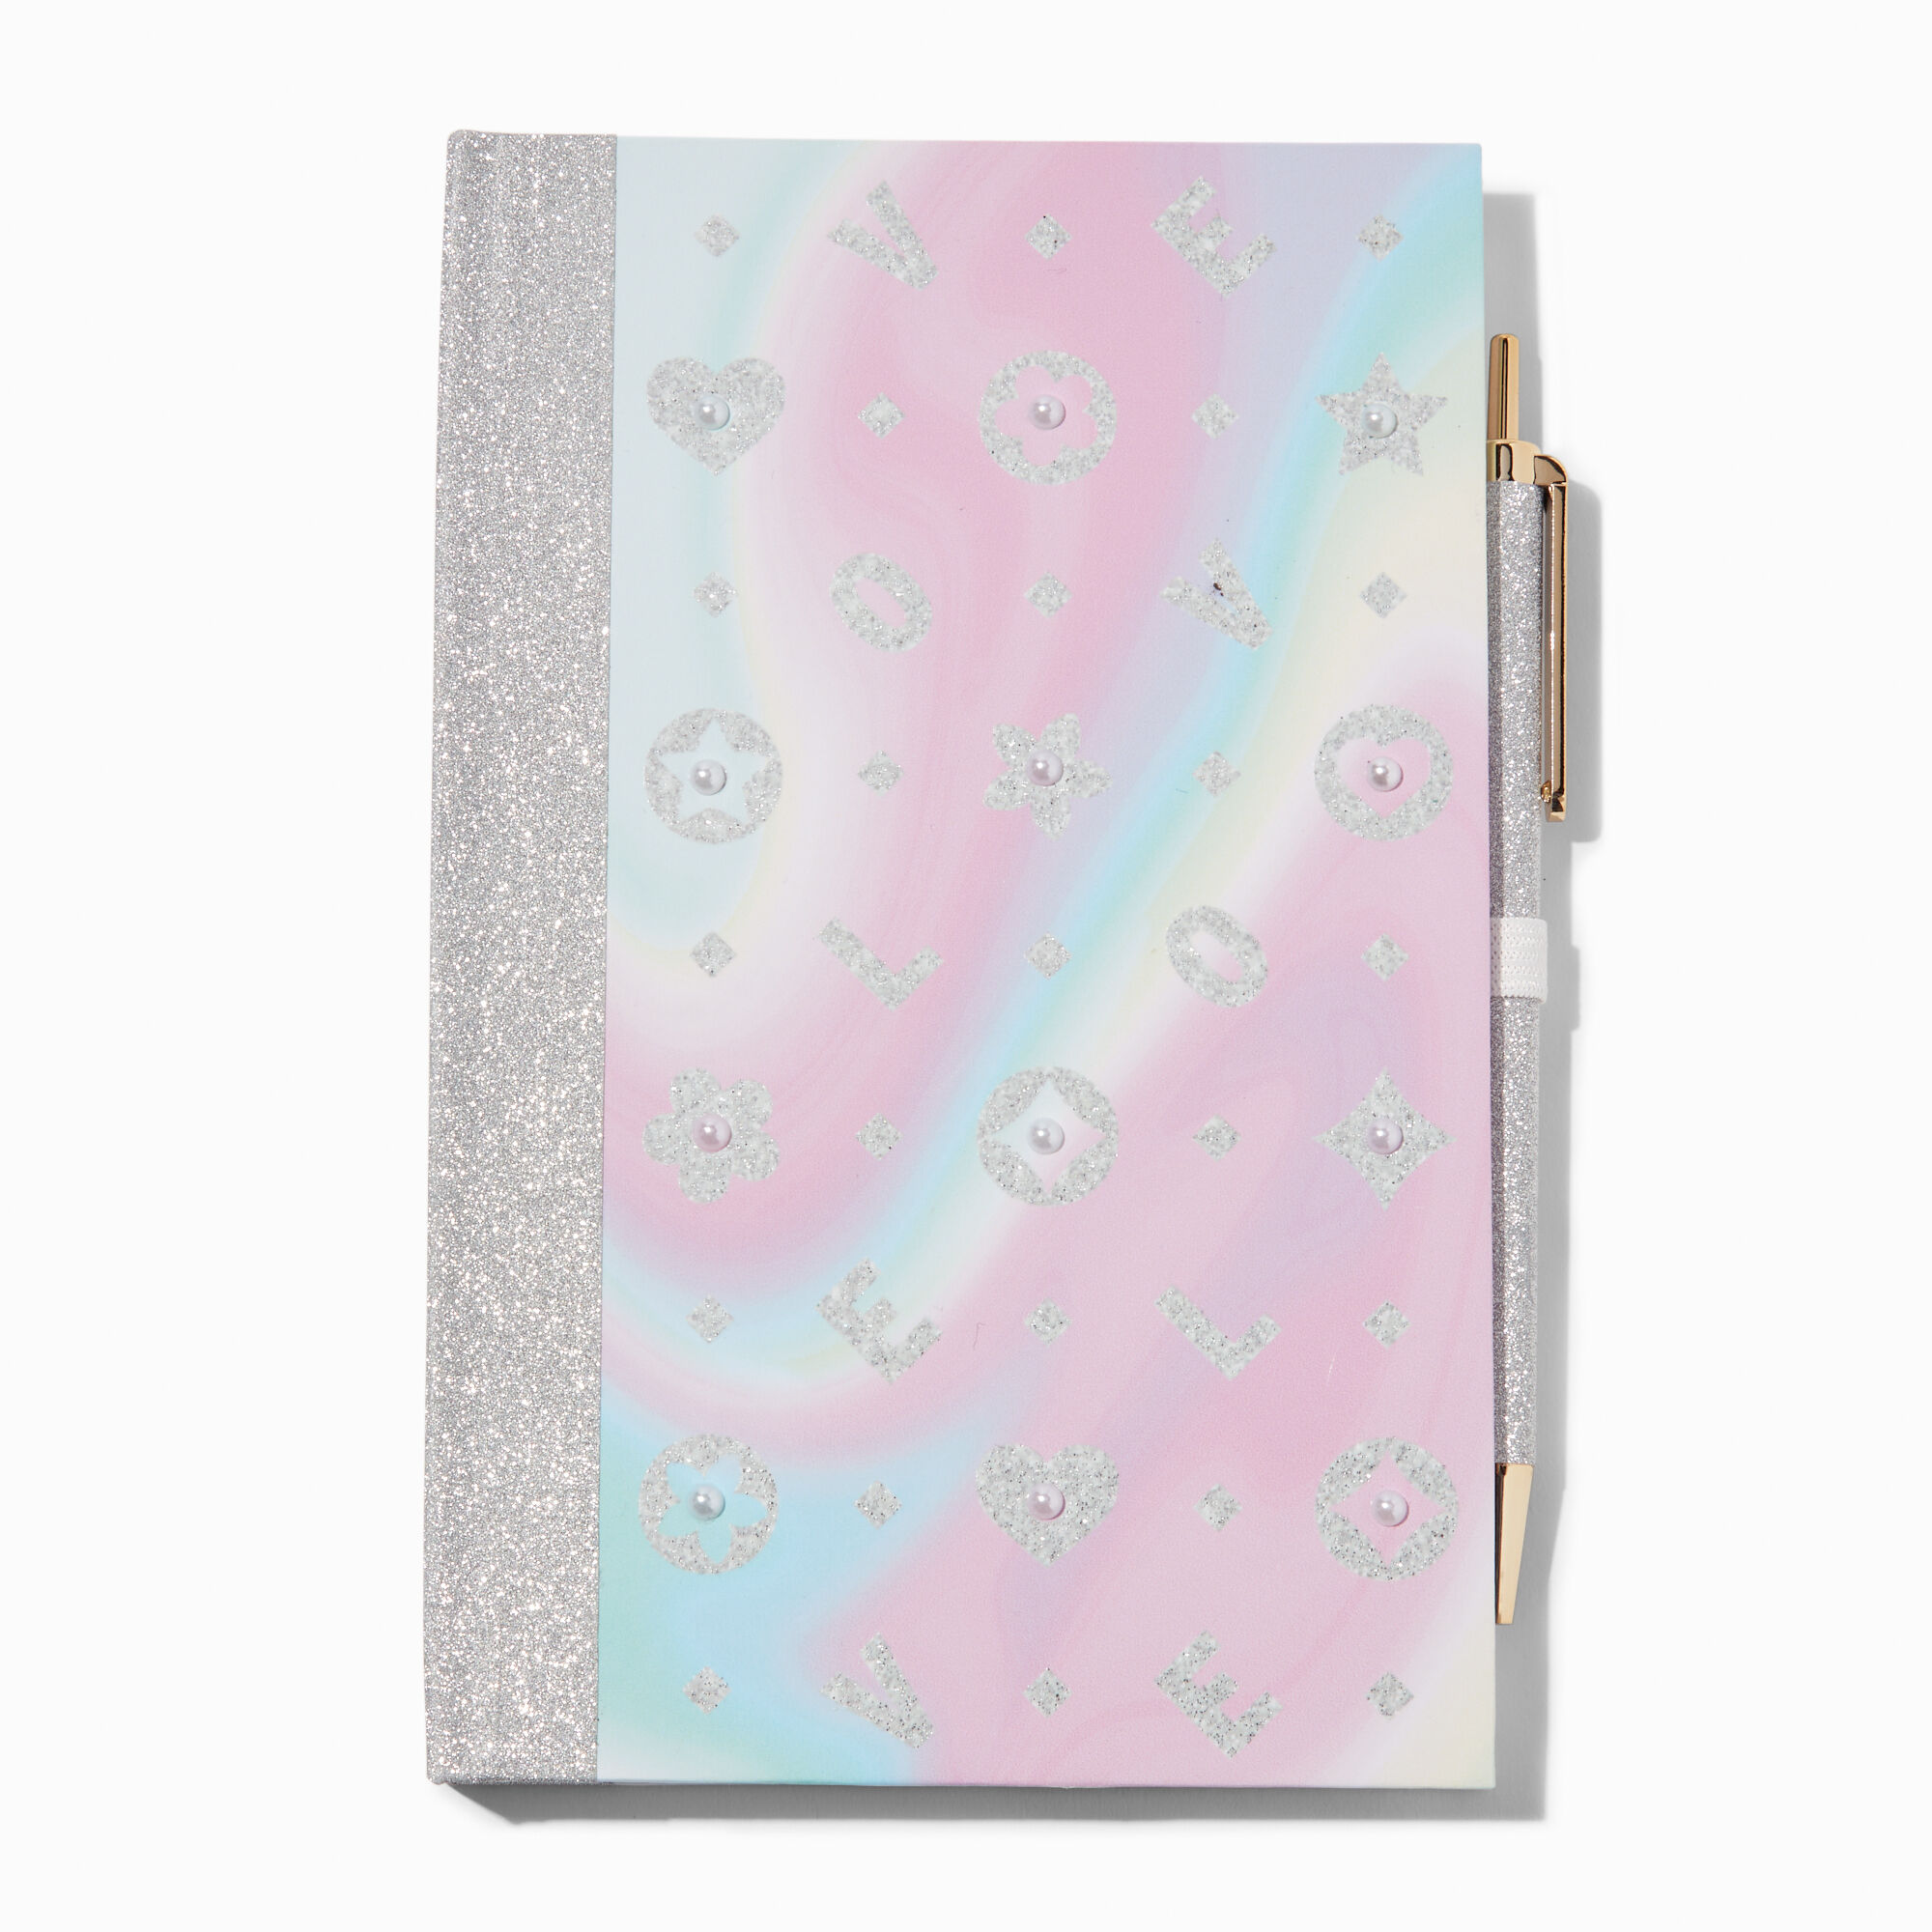 View Claires Glittery Status Icons Journal information